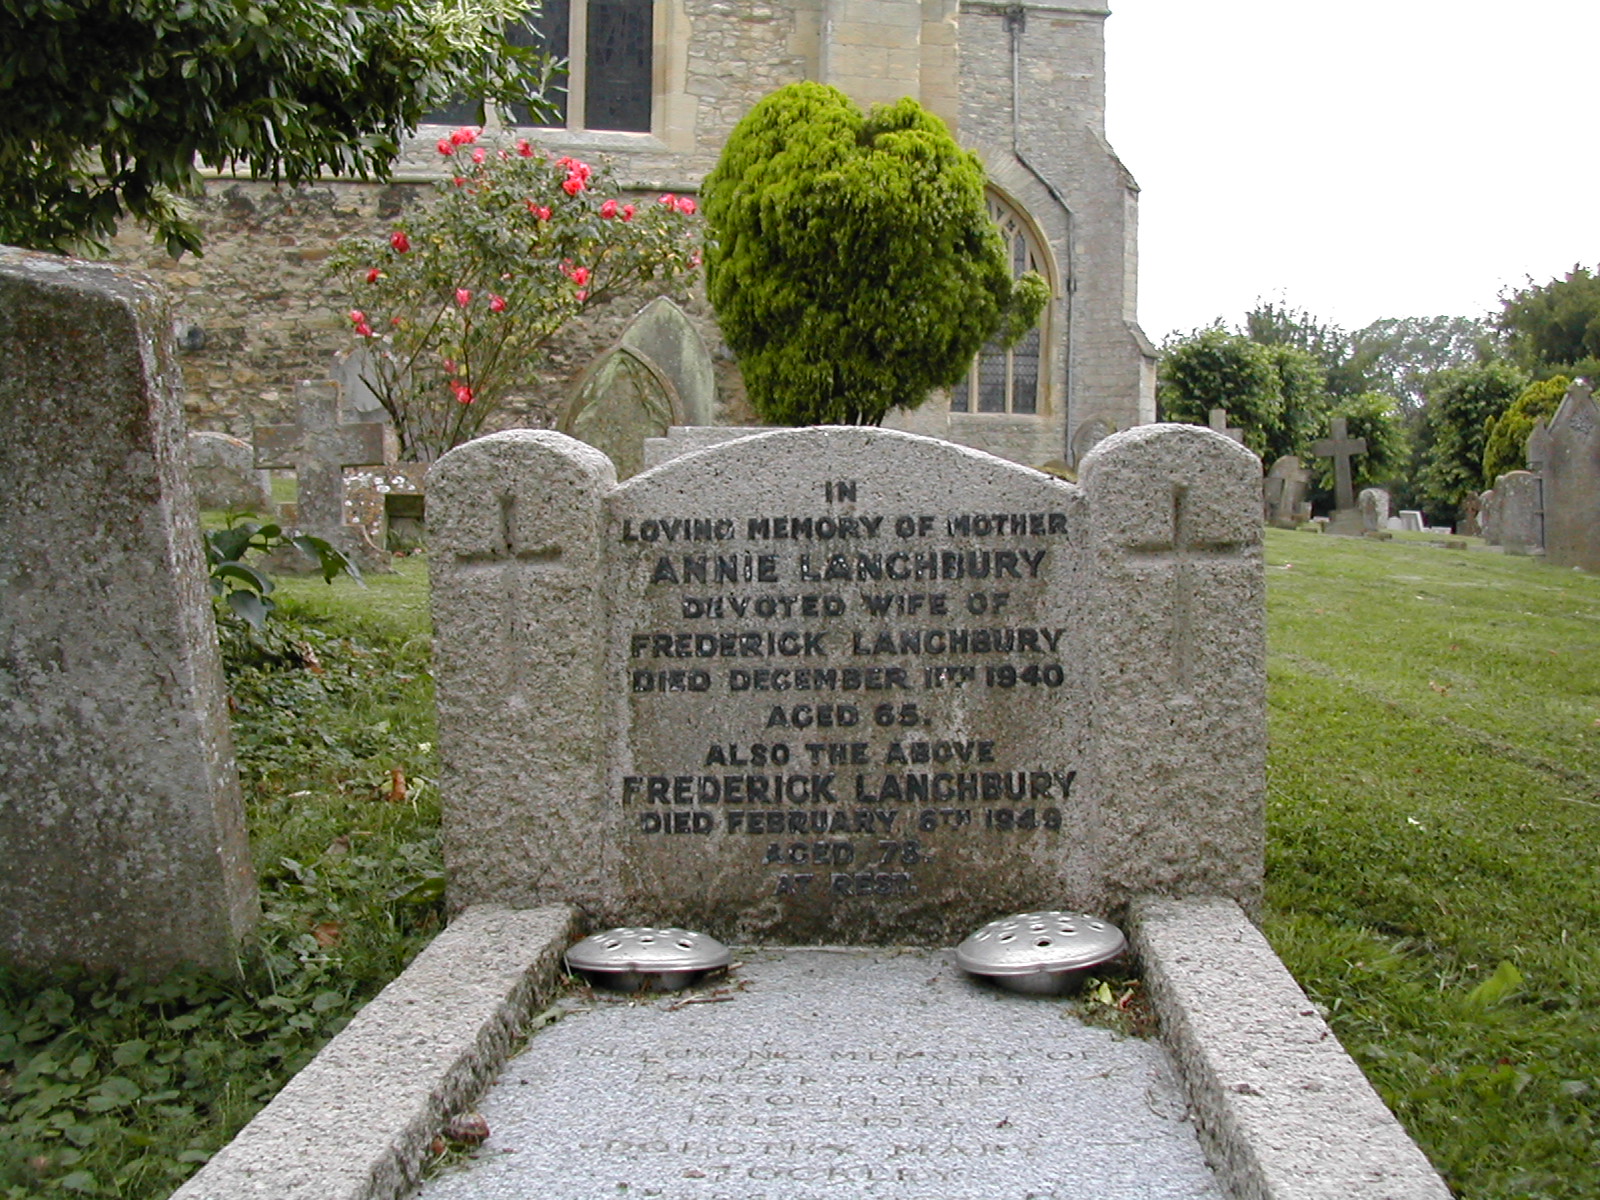 Grave of Annie and Fred LANCHBURY at Thame, Oxfordshire